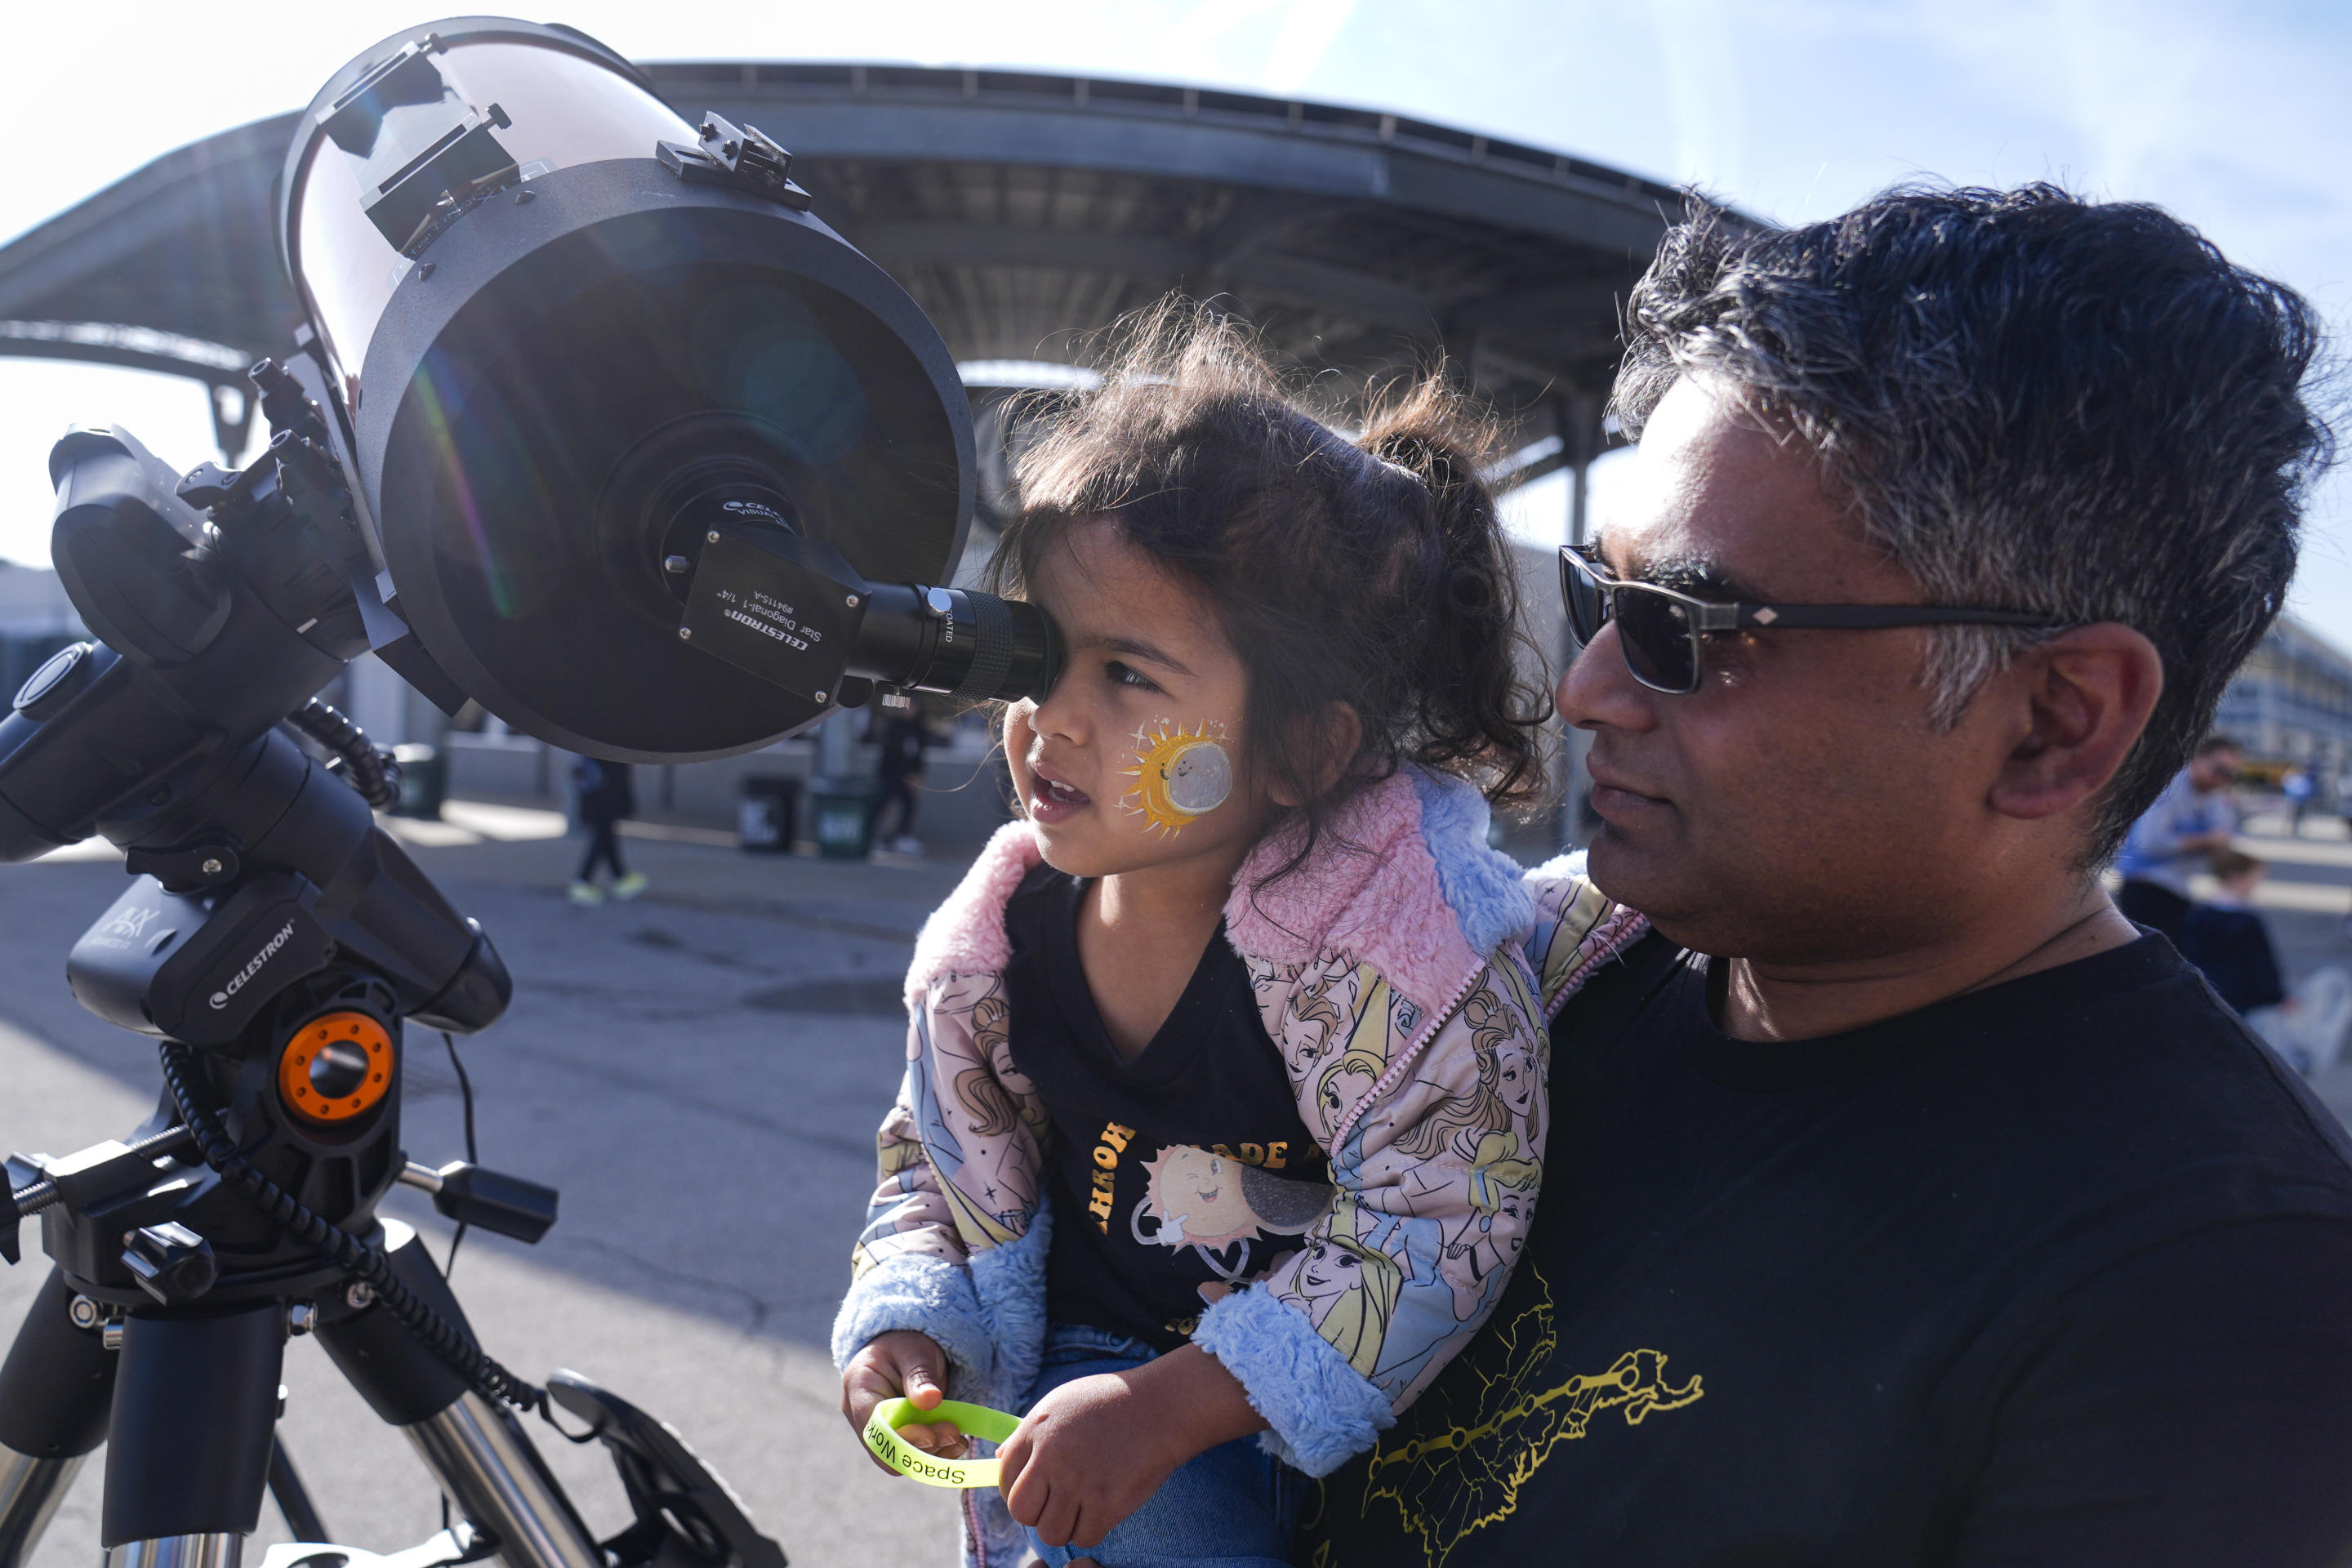 Tawhid Rana, of Midland, Mich., holds his daughter Thia as she views the sun through a telescope at the Indianapolis Motor Speedway in Indianapolis on Monday.